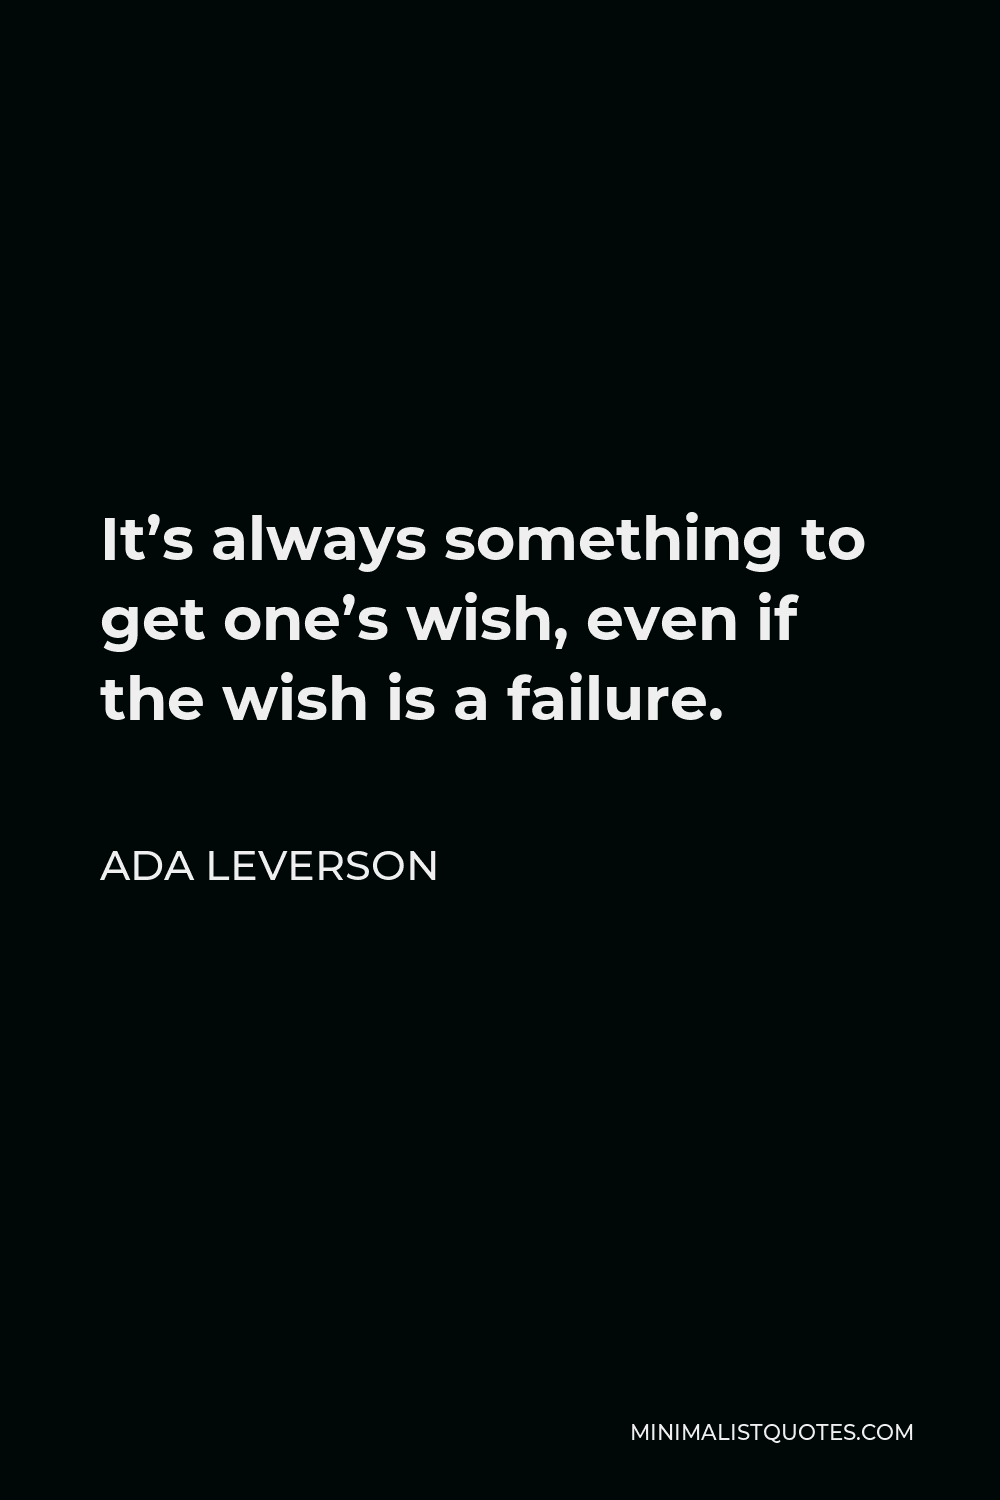 Ada Leverson Quote - It’s always something to get one’s wish, even if the wish is a failure.